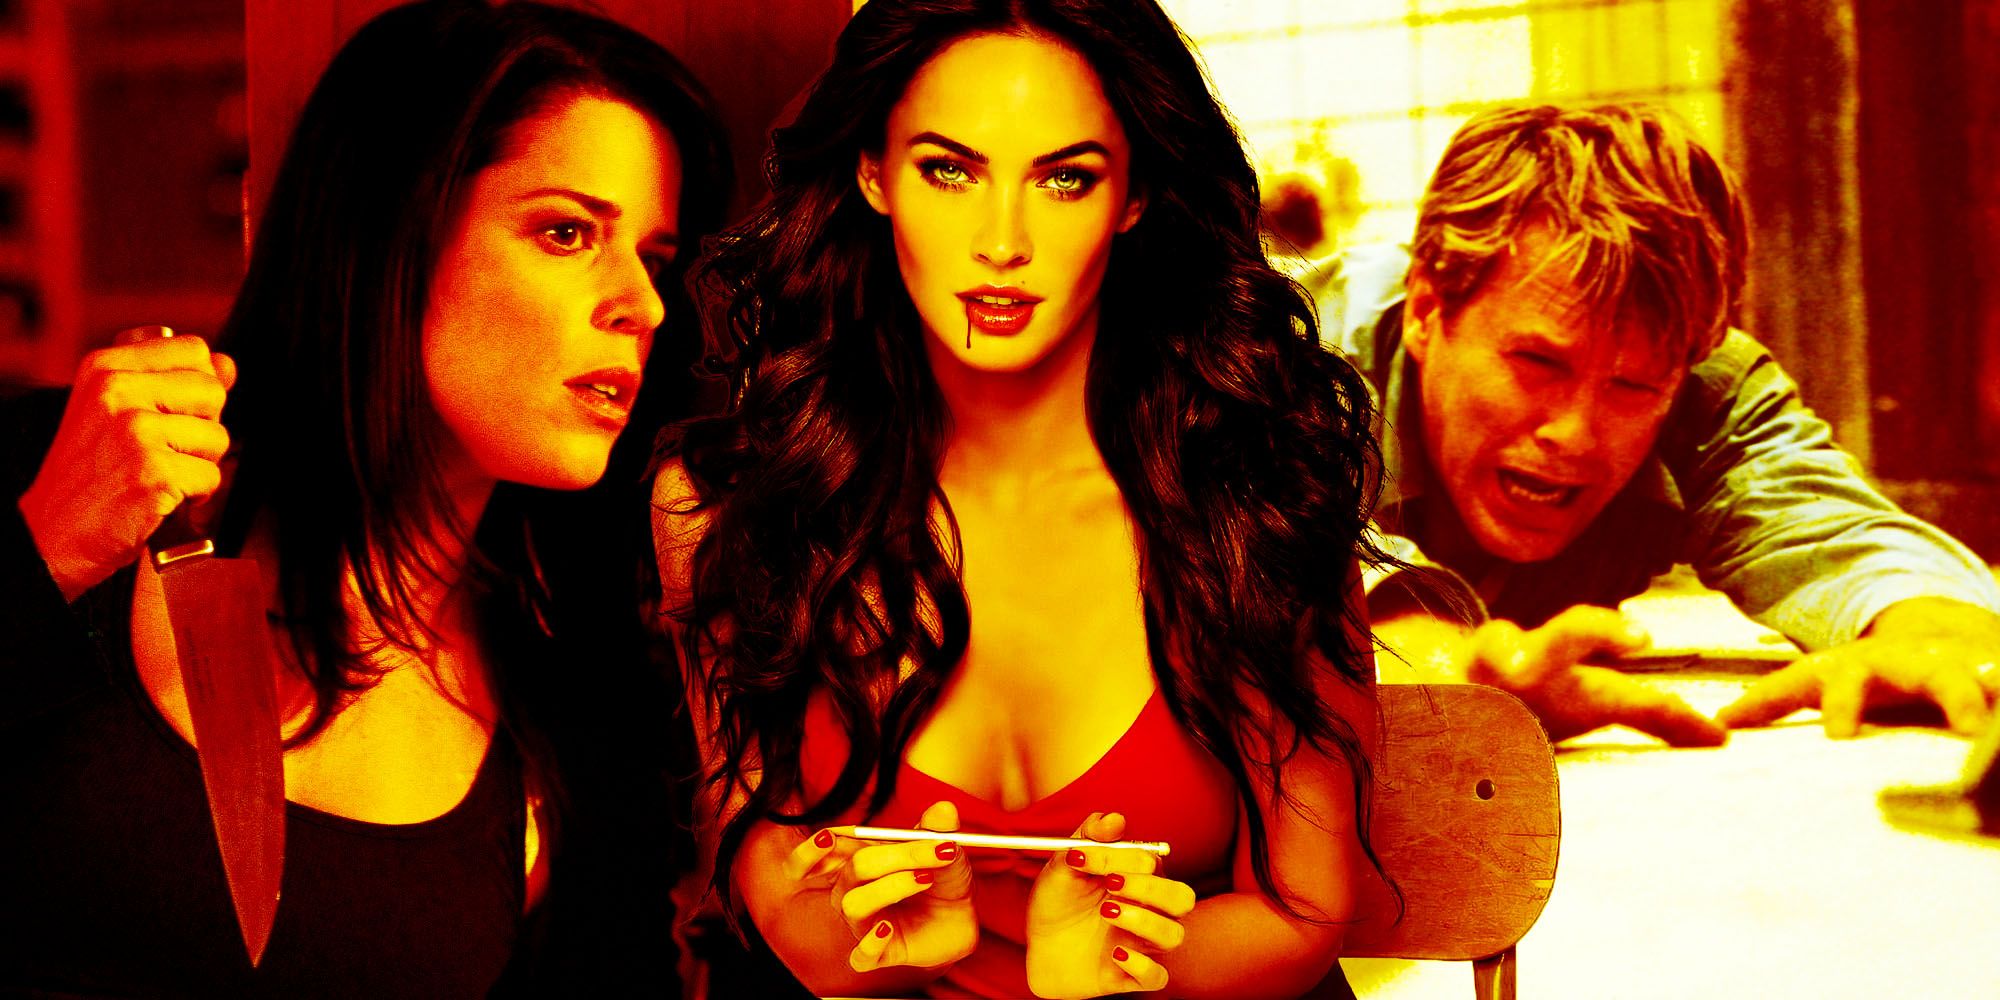 Scream 4, Jennifer's Body, and Saw images